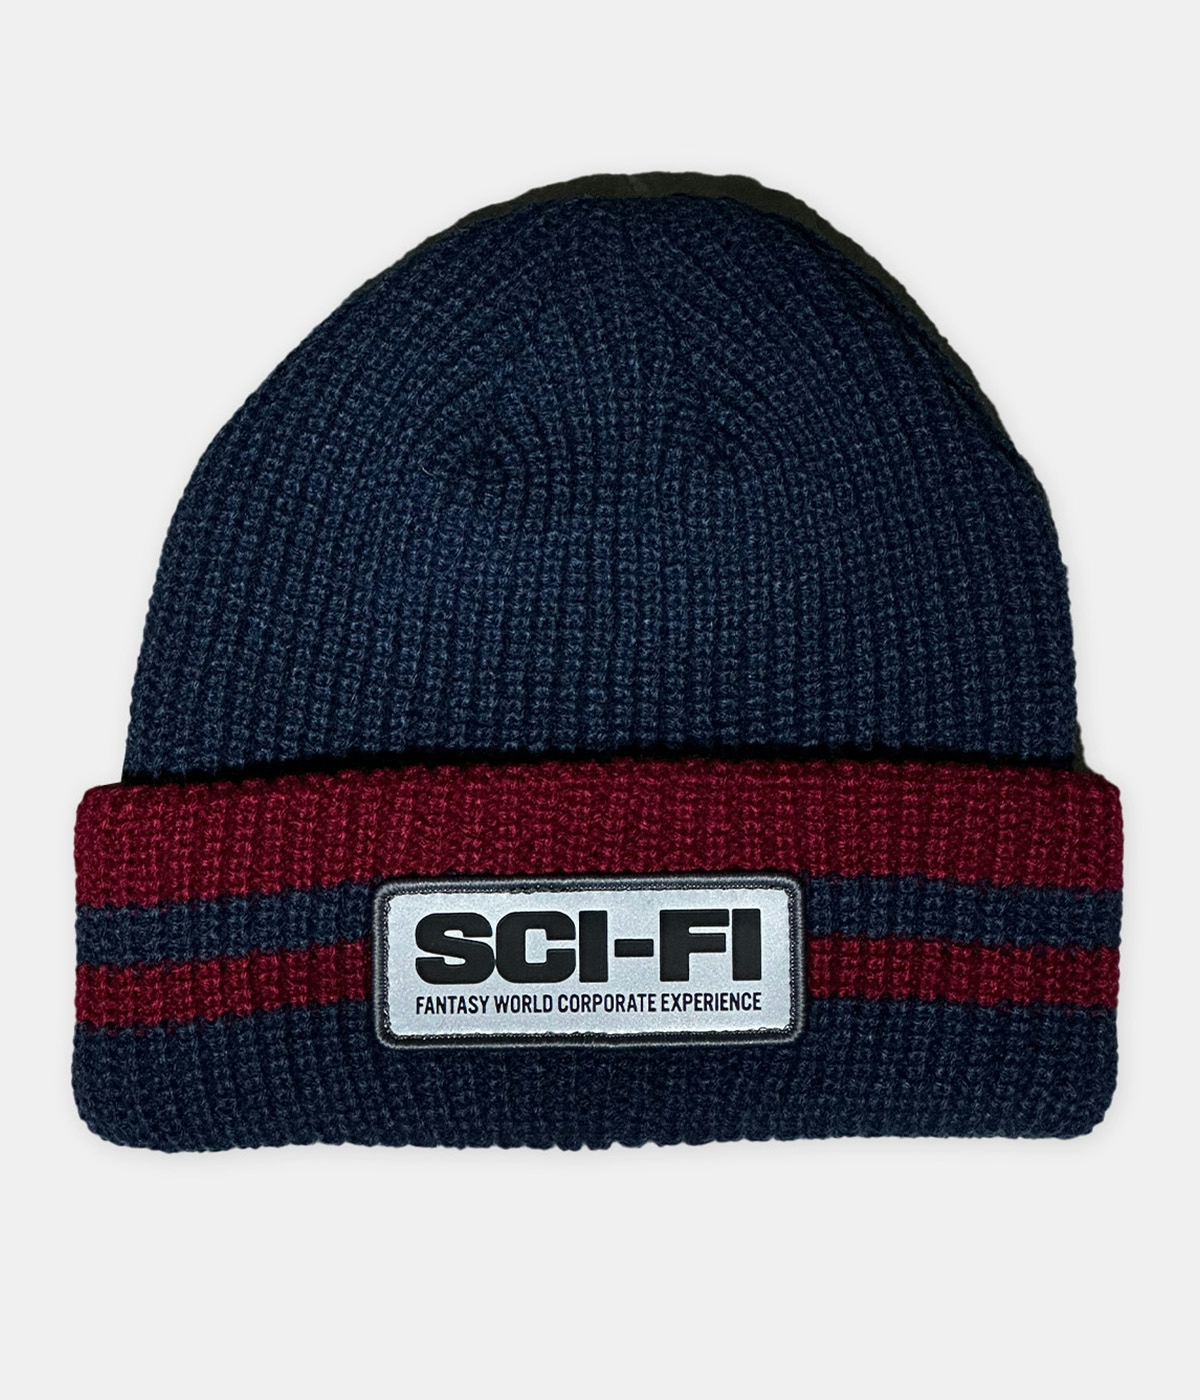 Sci-Fi Fantasy Reflective Patch Beanie Navy/Red 1